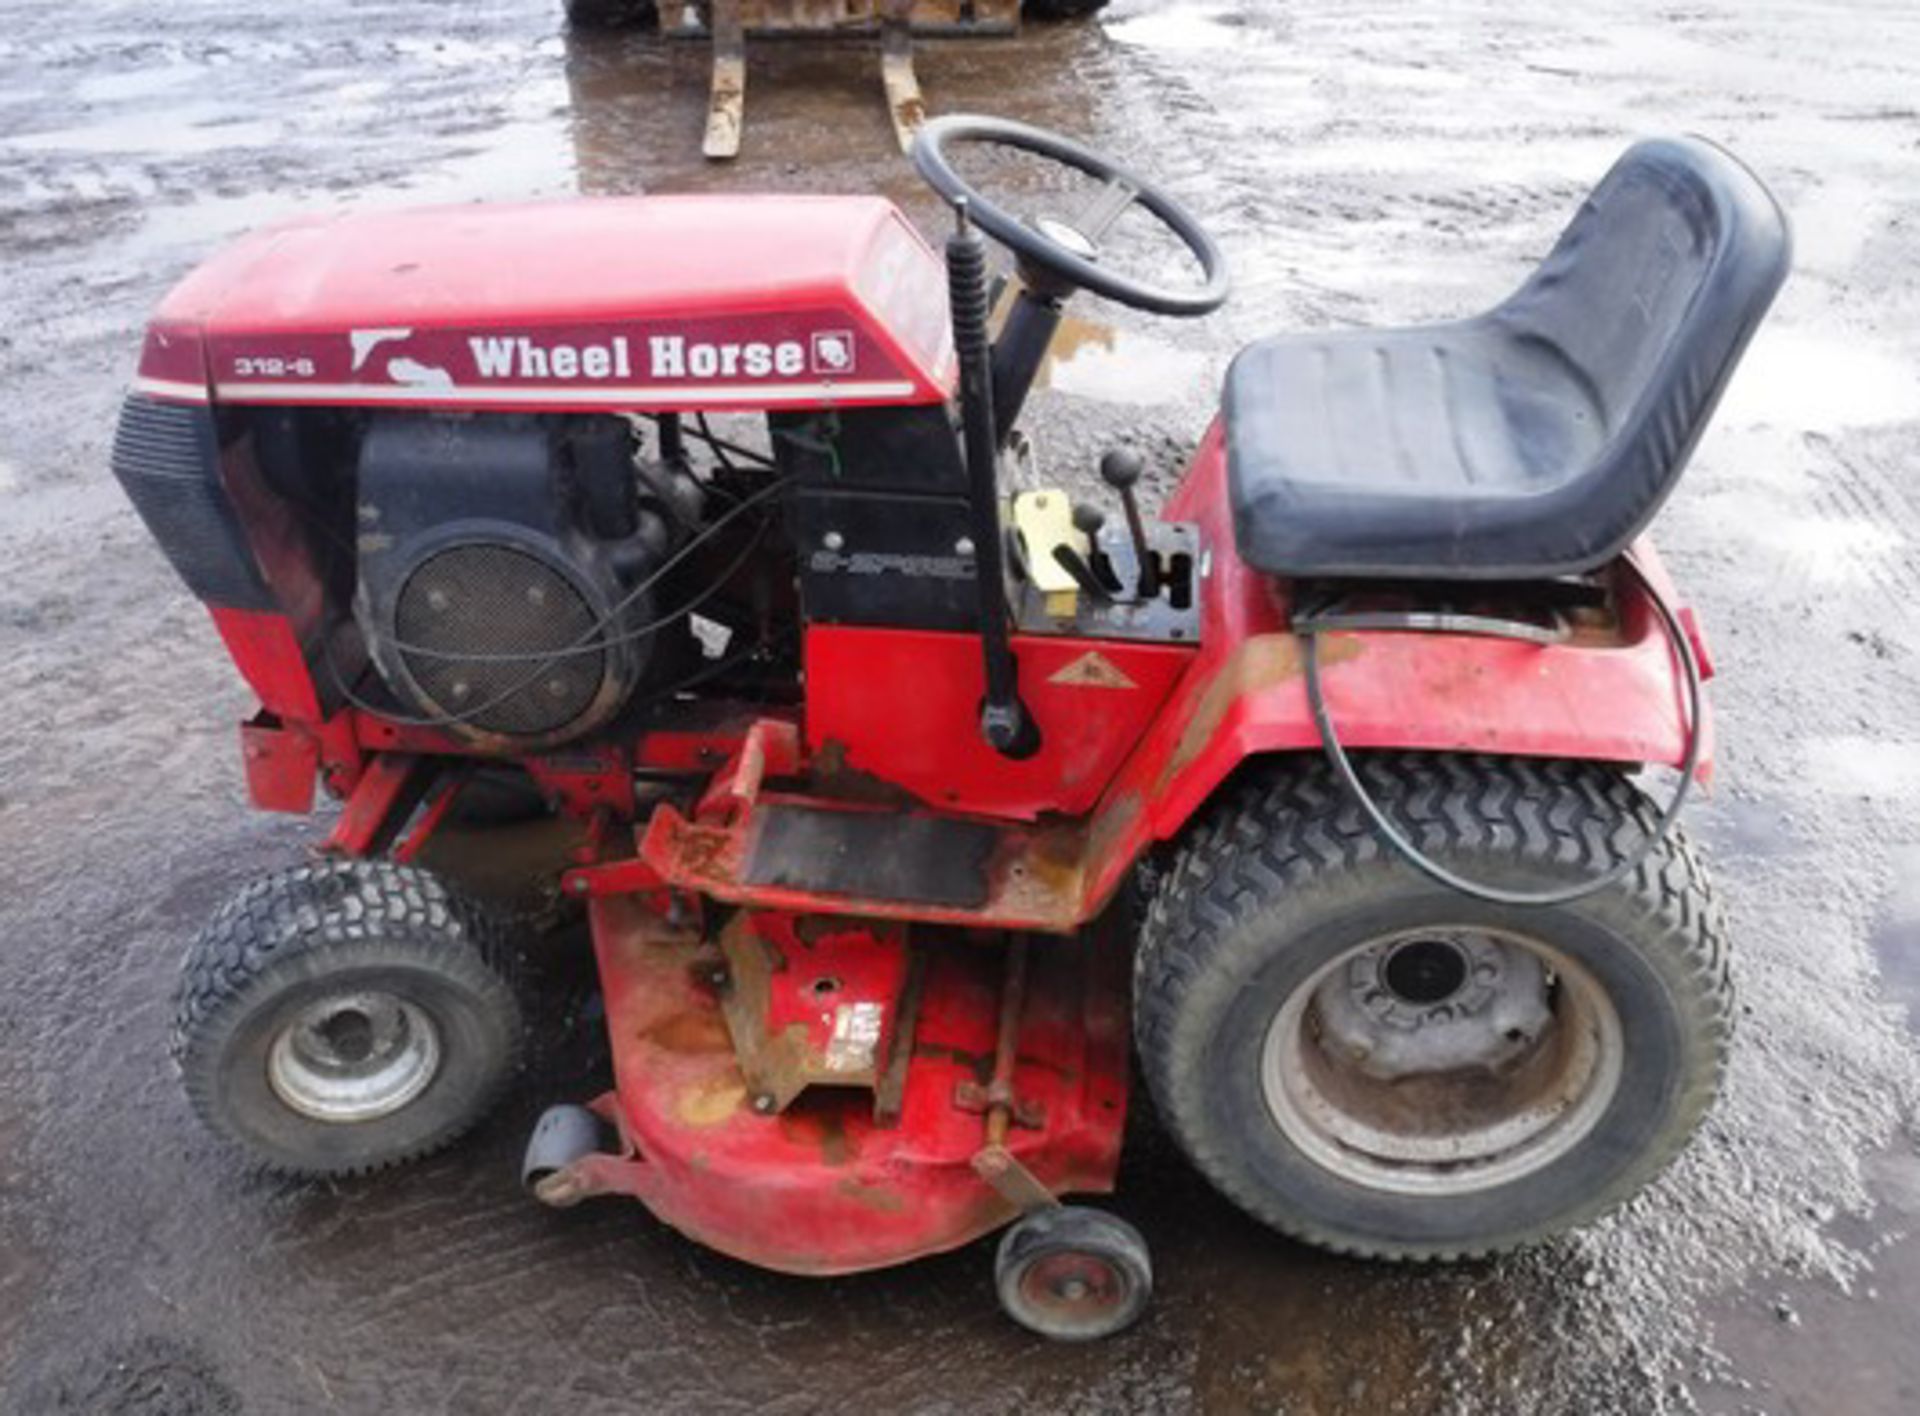 1986 WHEEL HORSE 312.8 LAWN CUTTER, VIN - 21-12K-802-16902, ENGINE NO - 1600649564, 1389HRS (NOT VER - Image 10 of 11